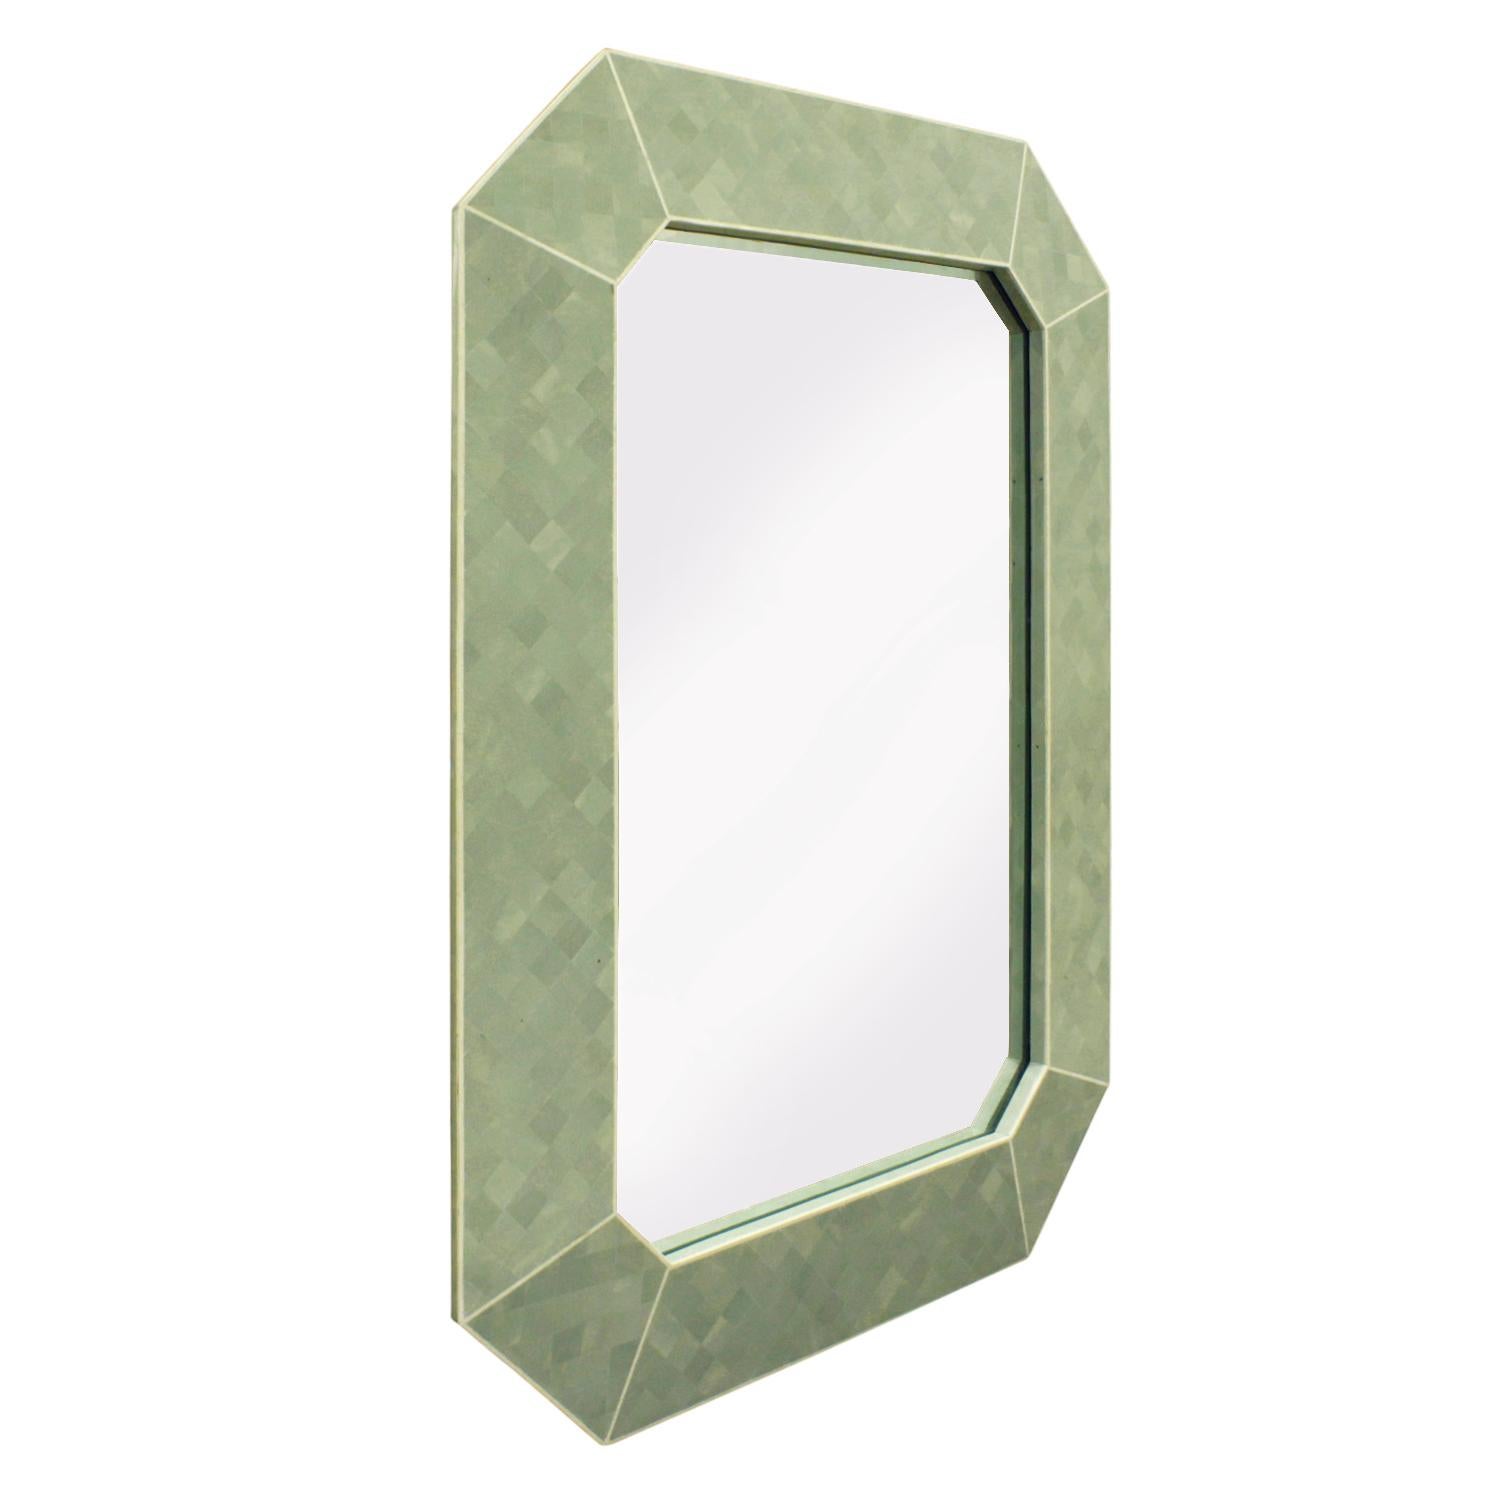 Octagonal wall hanging mirror in green tessellated stone with bone inlays by Maitland Smith, American 1970s. This mirror is meticulously made and the color is beautiful.